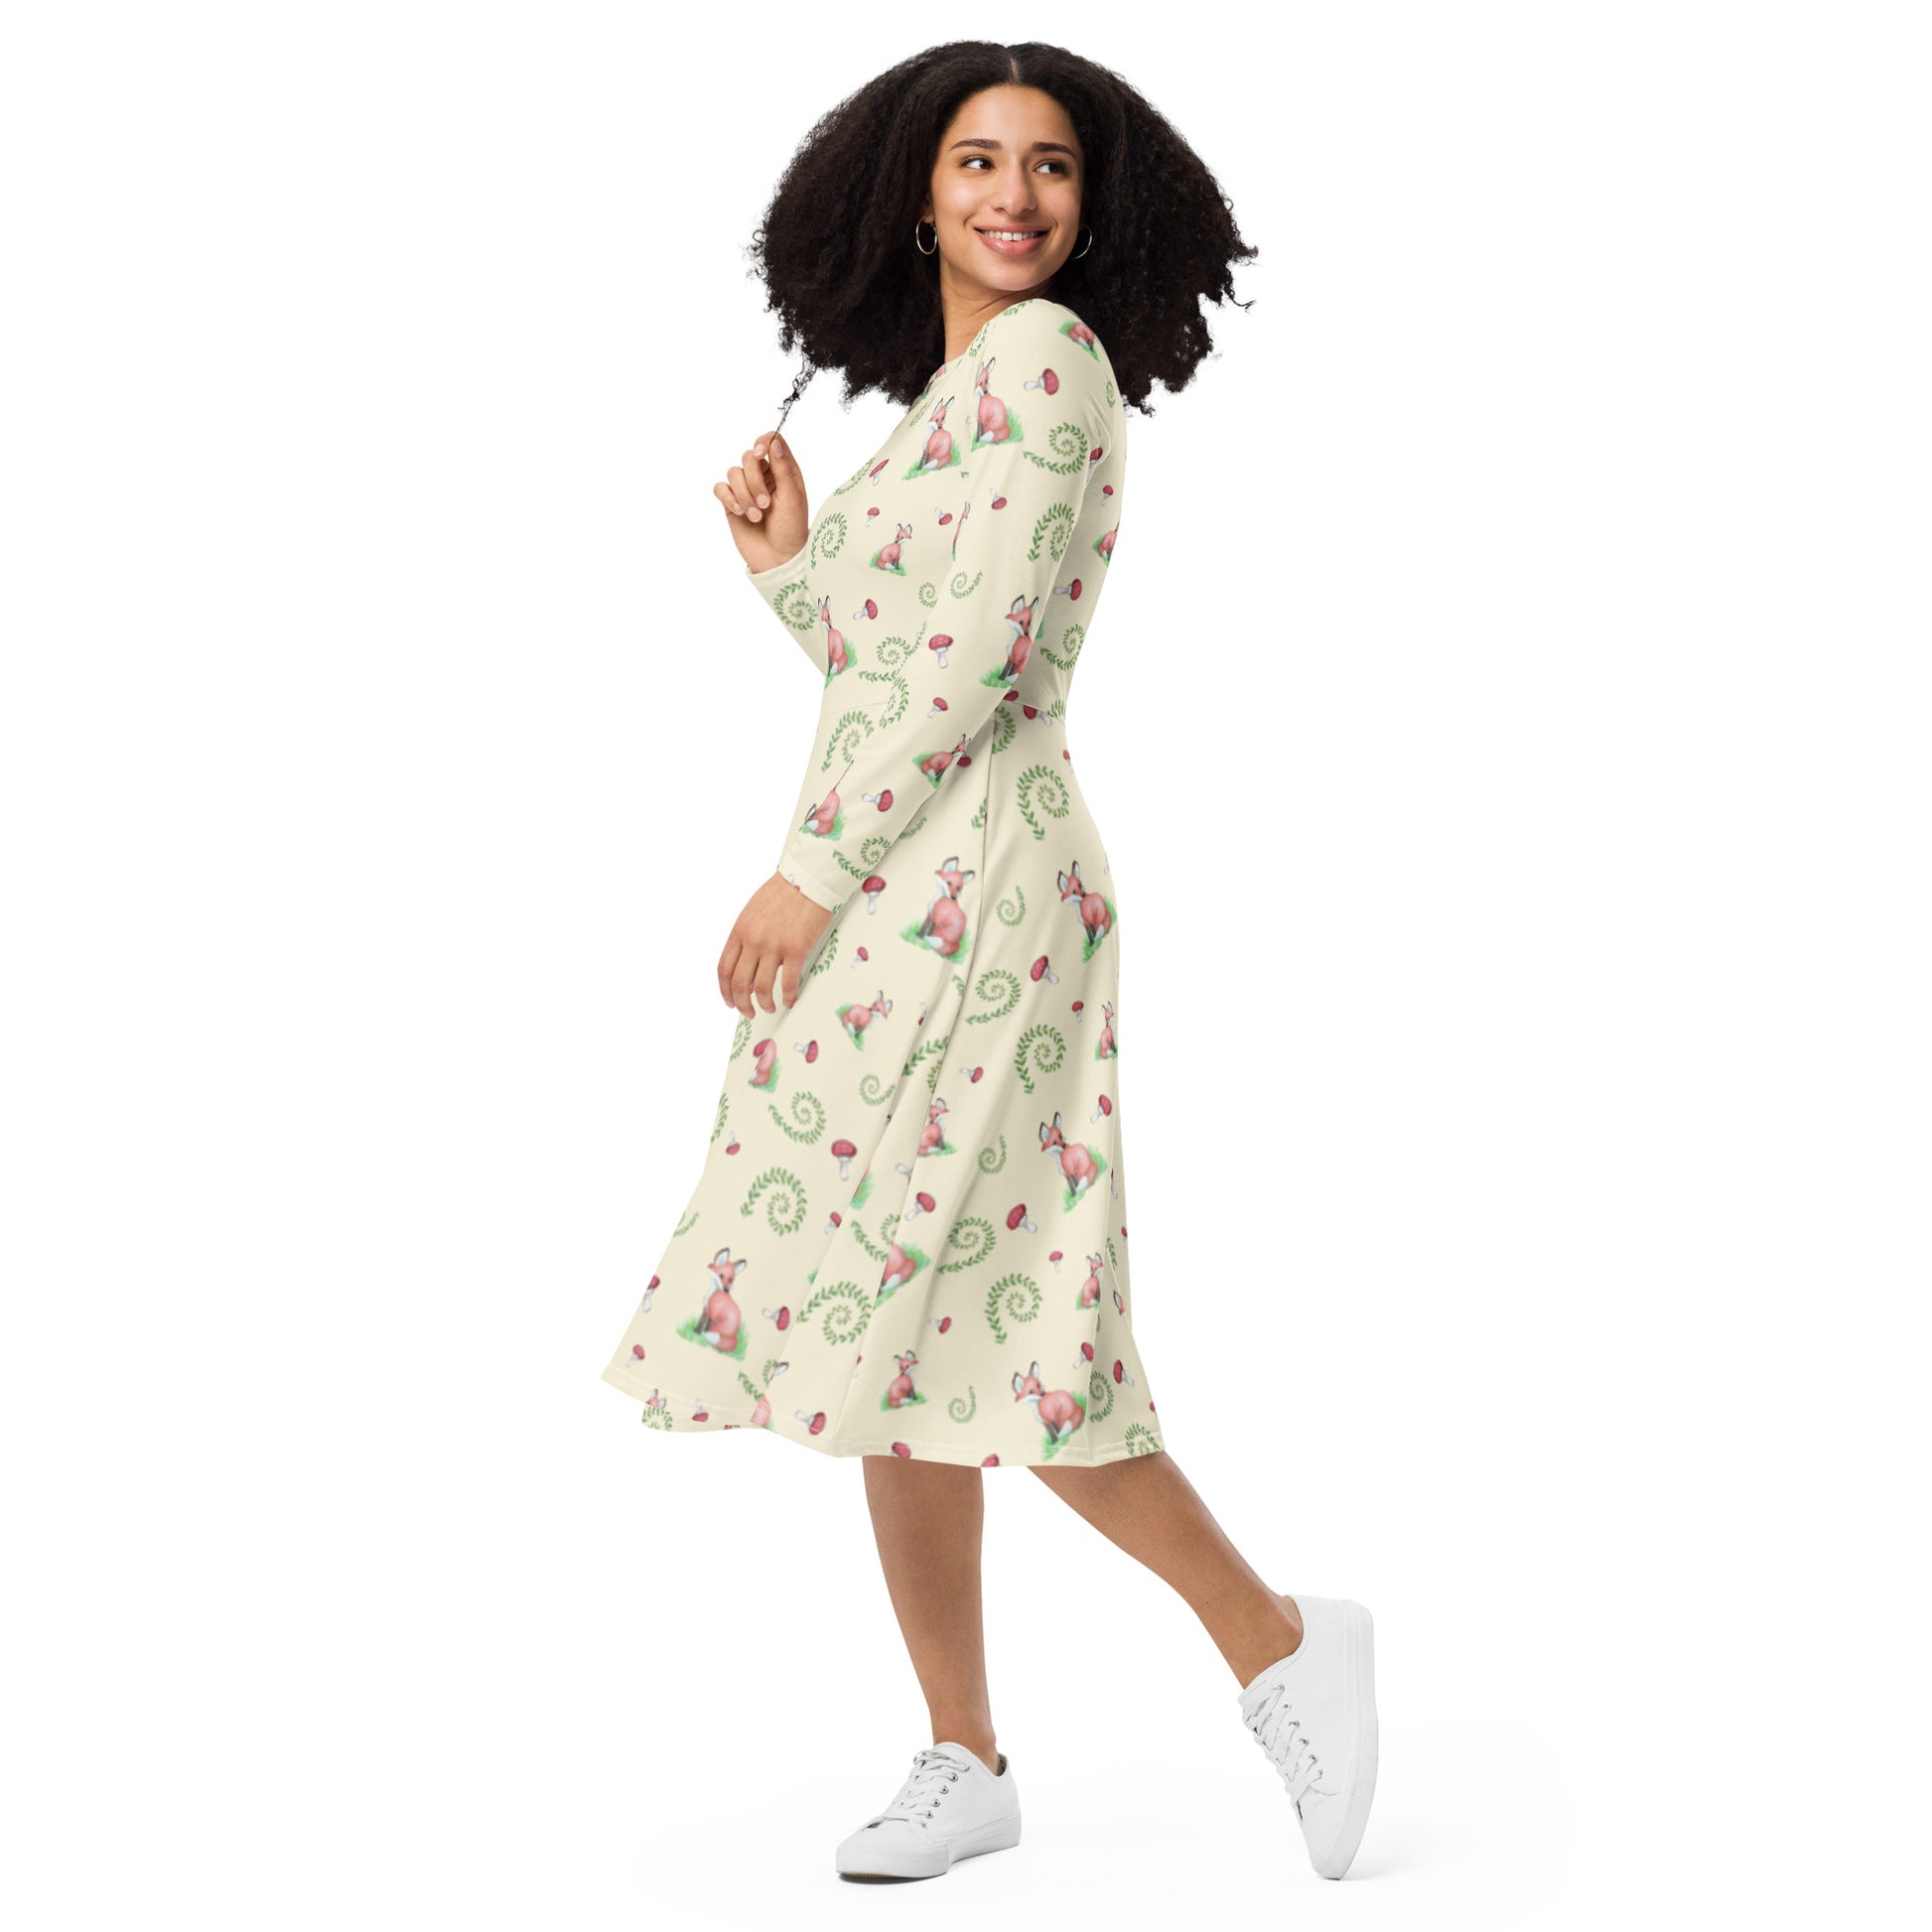 Fox pattern long sleeve midi dress with side pockets, fitted waist, and flared bottom. Foxes, ferns, and mushrooms are patterned on the apricot white fabric. Soft and comfortable. Shown on female model facing left.